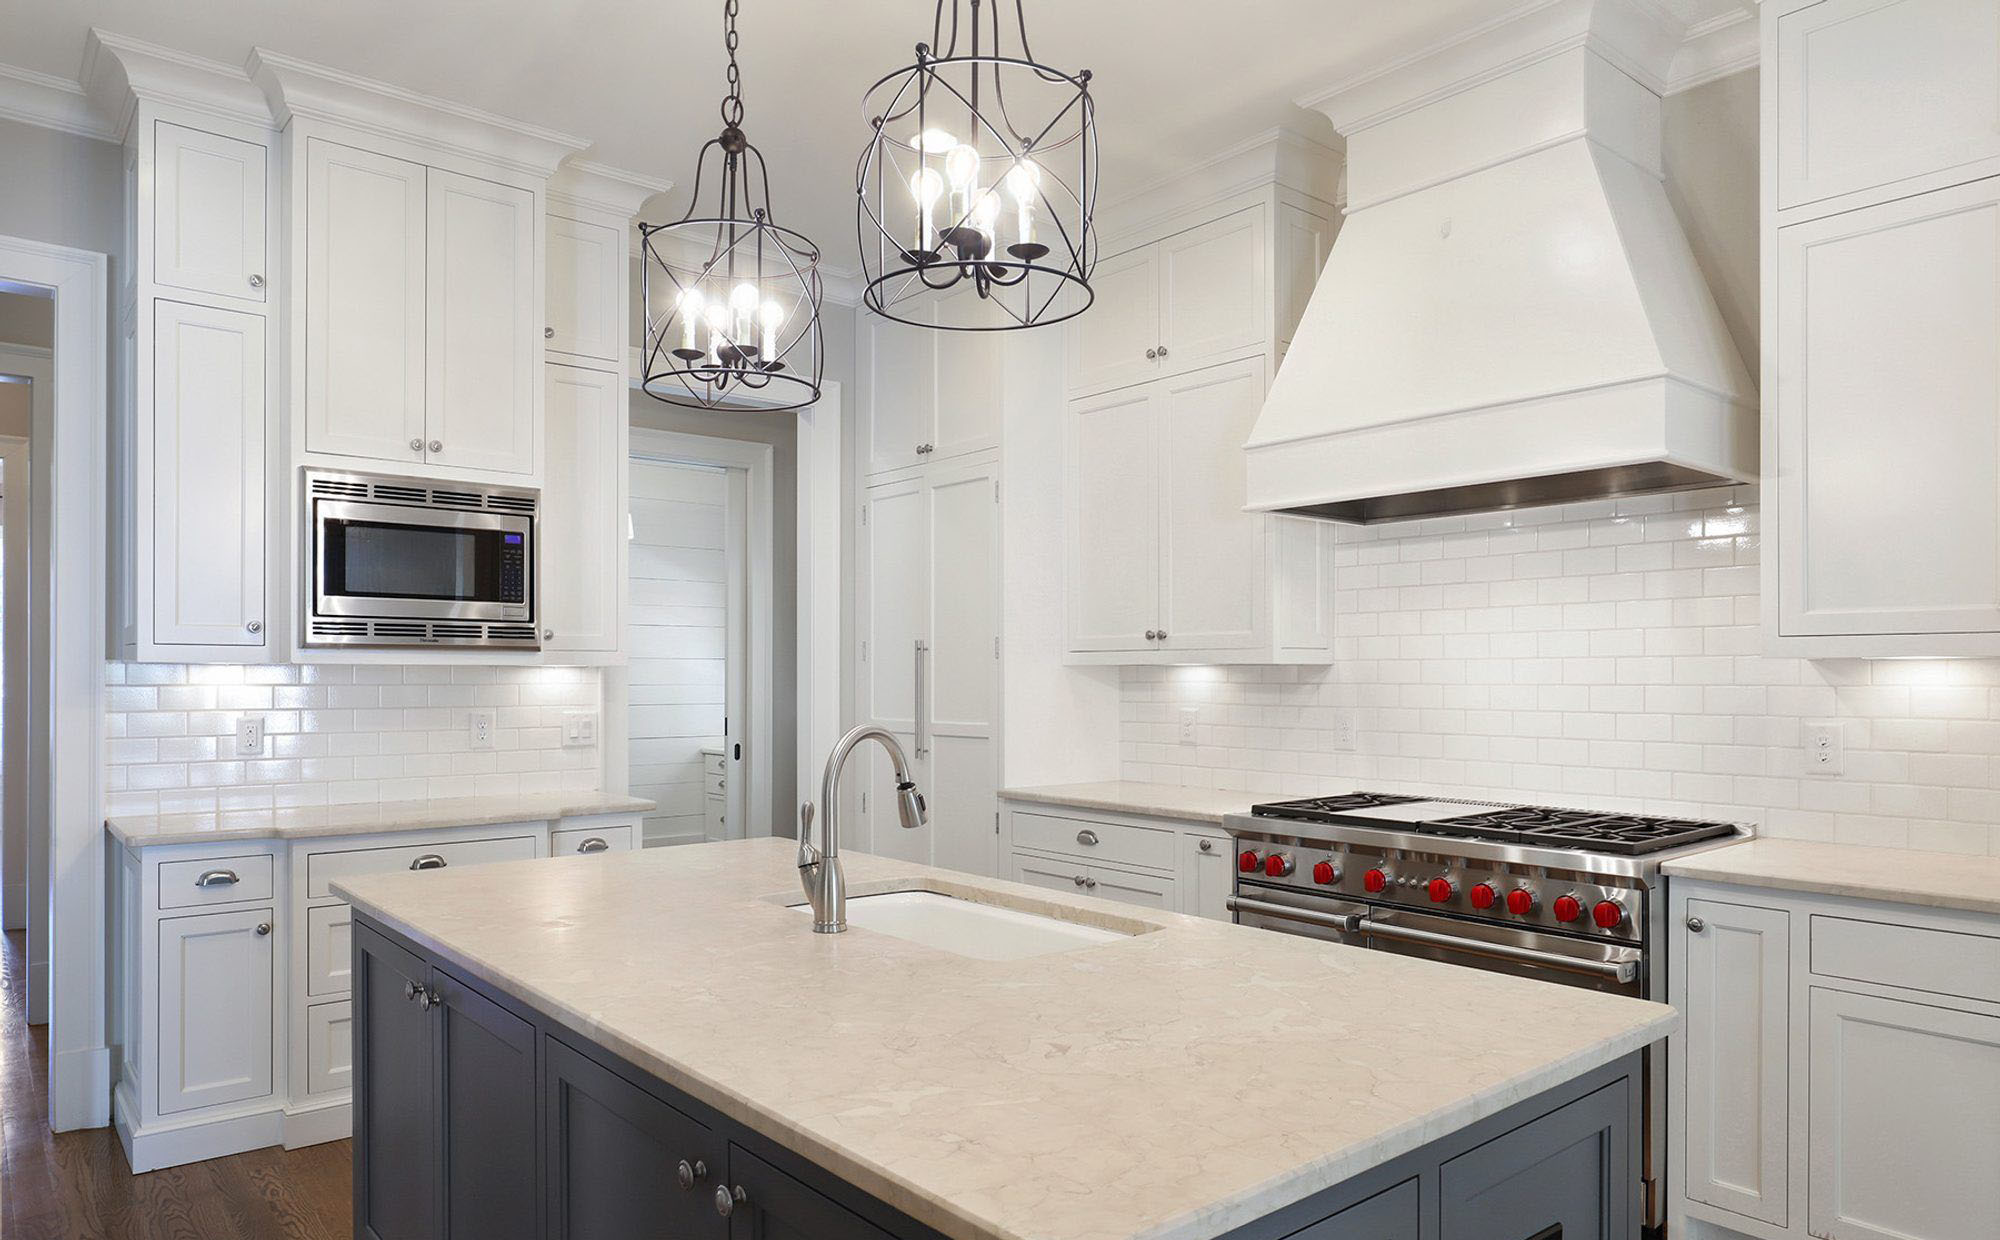 This medium gray island is a nice choice along side the white shaker style cabinetry. two tone kitchen cabinets.